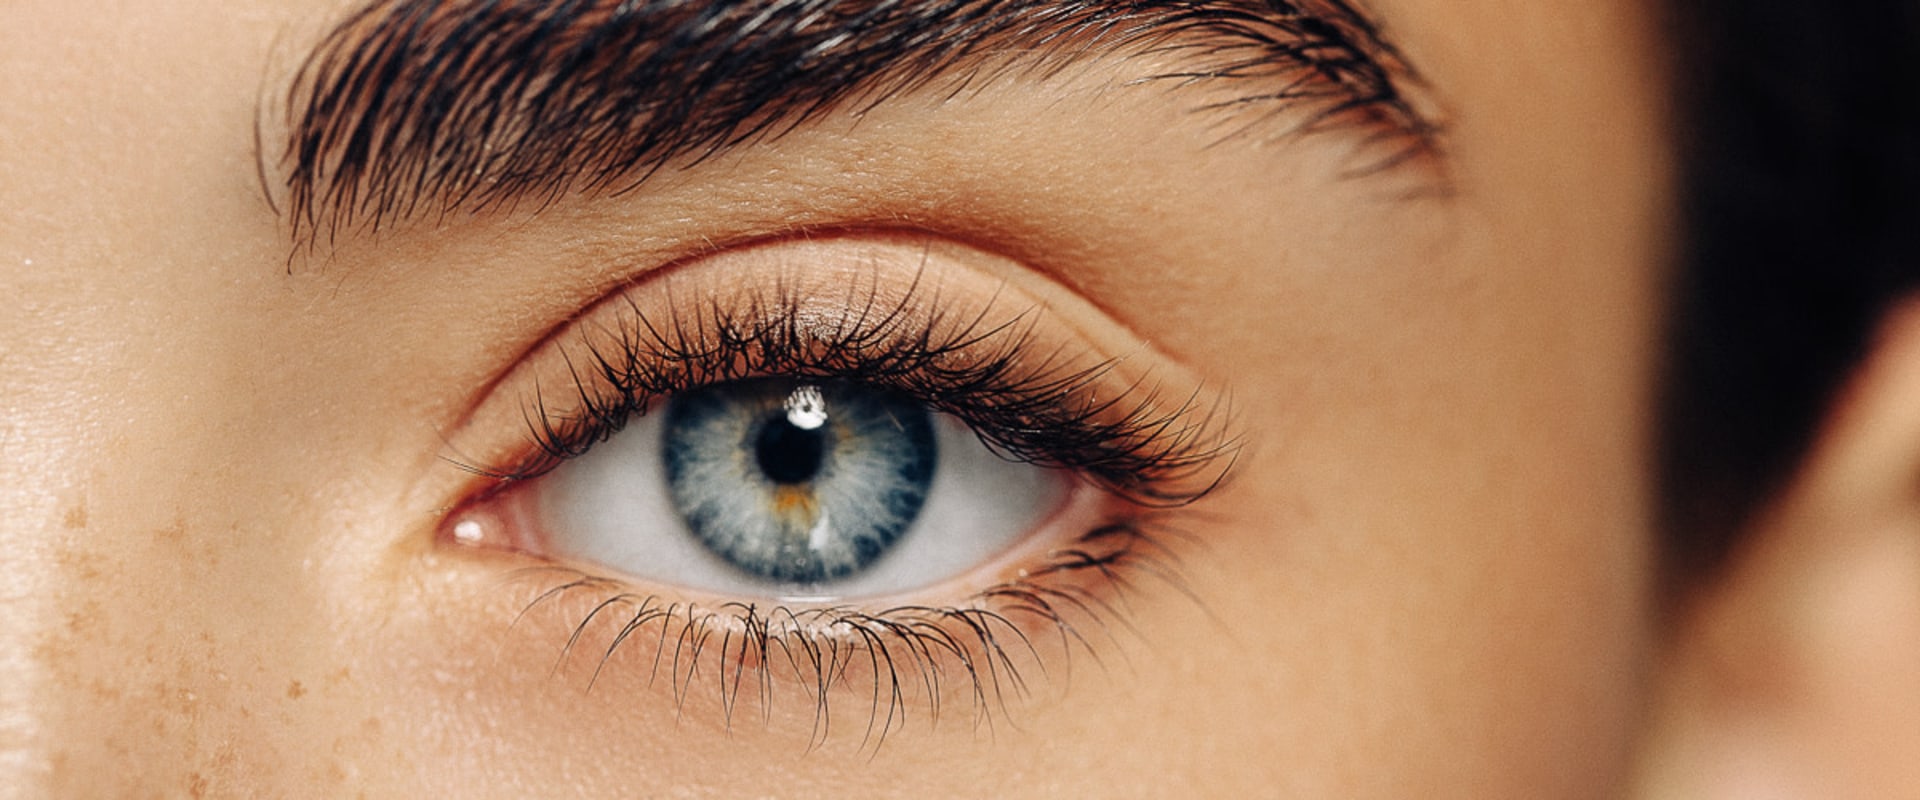 Can Eyelashes Grow Back After Being Pulled Out with Extensions?